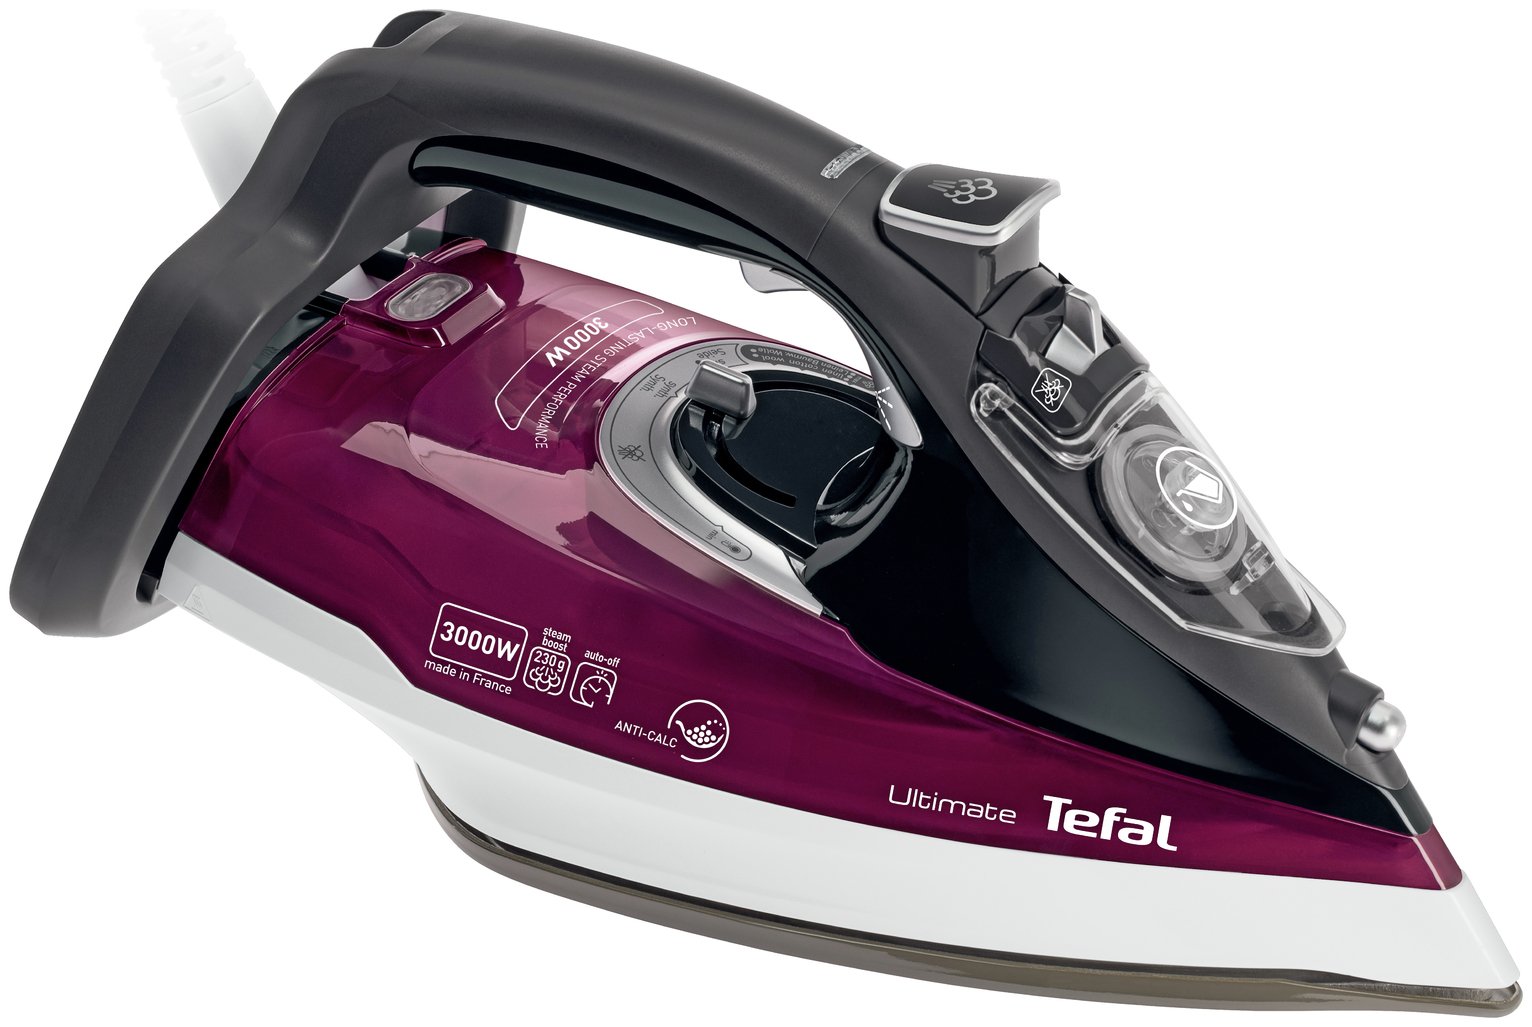 Tefal FV9788 Ultimate Anti-scale Steam Iron review